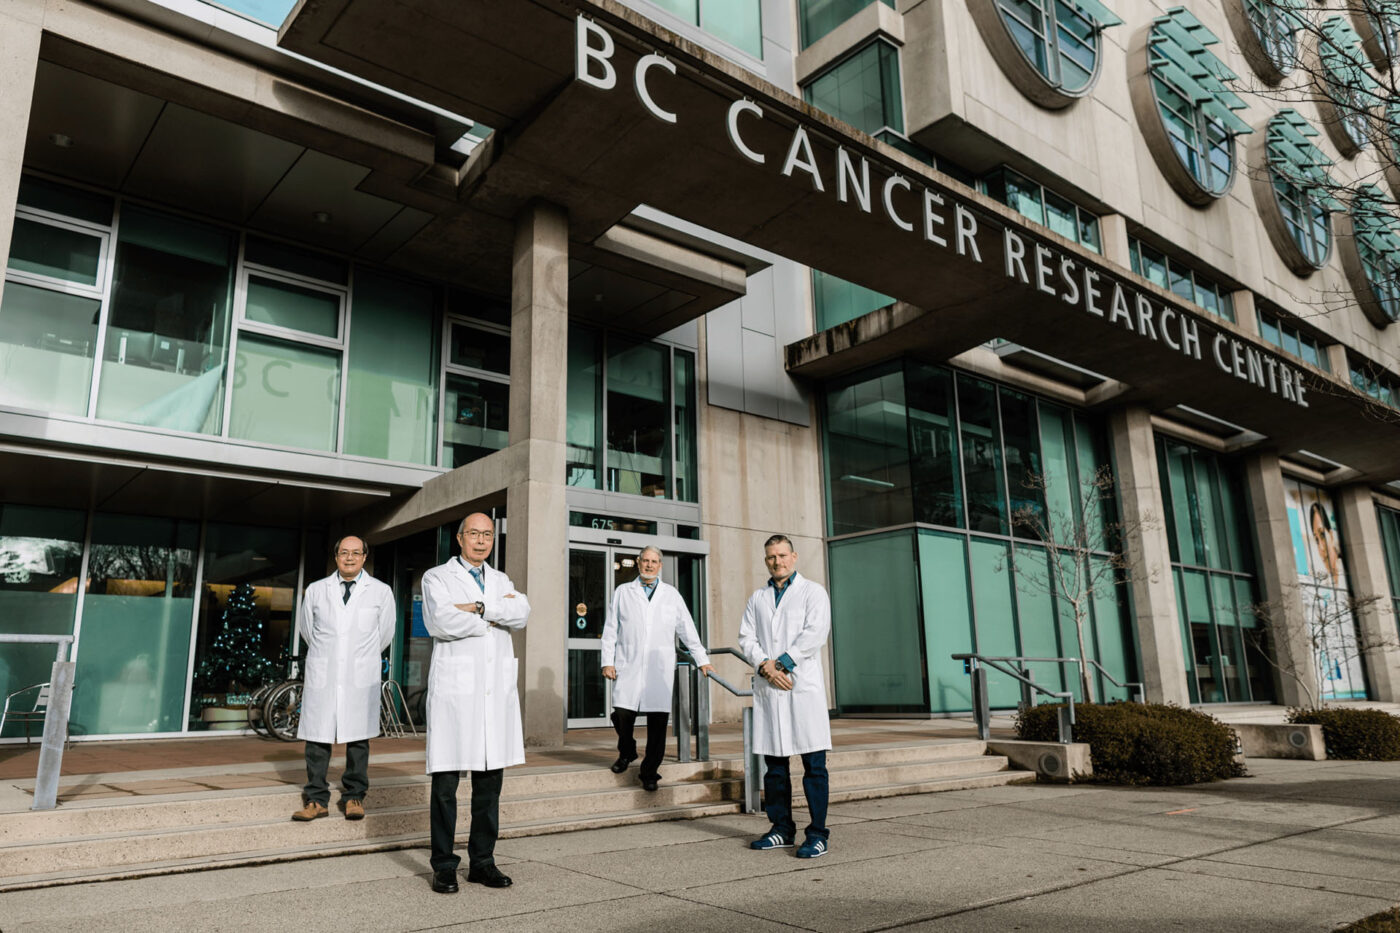 BC Cancer Foundation received a historic philanthropic investment from the Leon Judah Blackmore Foundation to advance lung cancer research and care